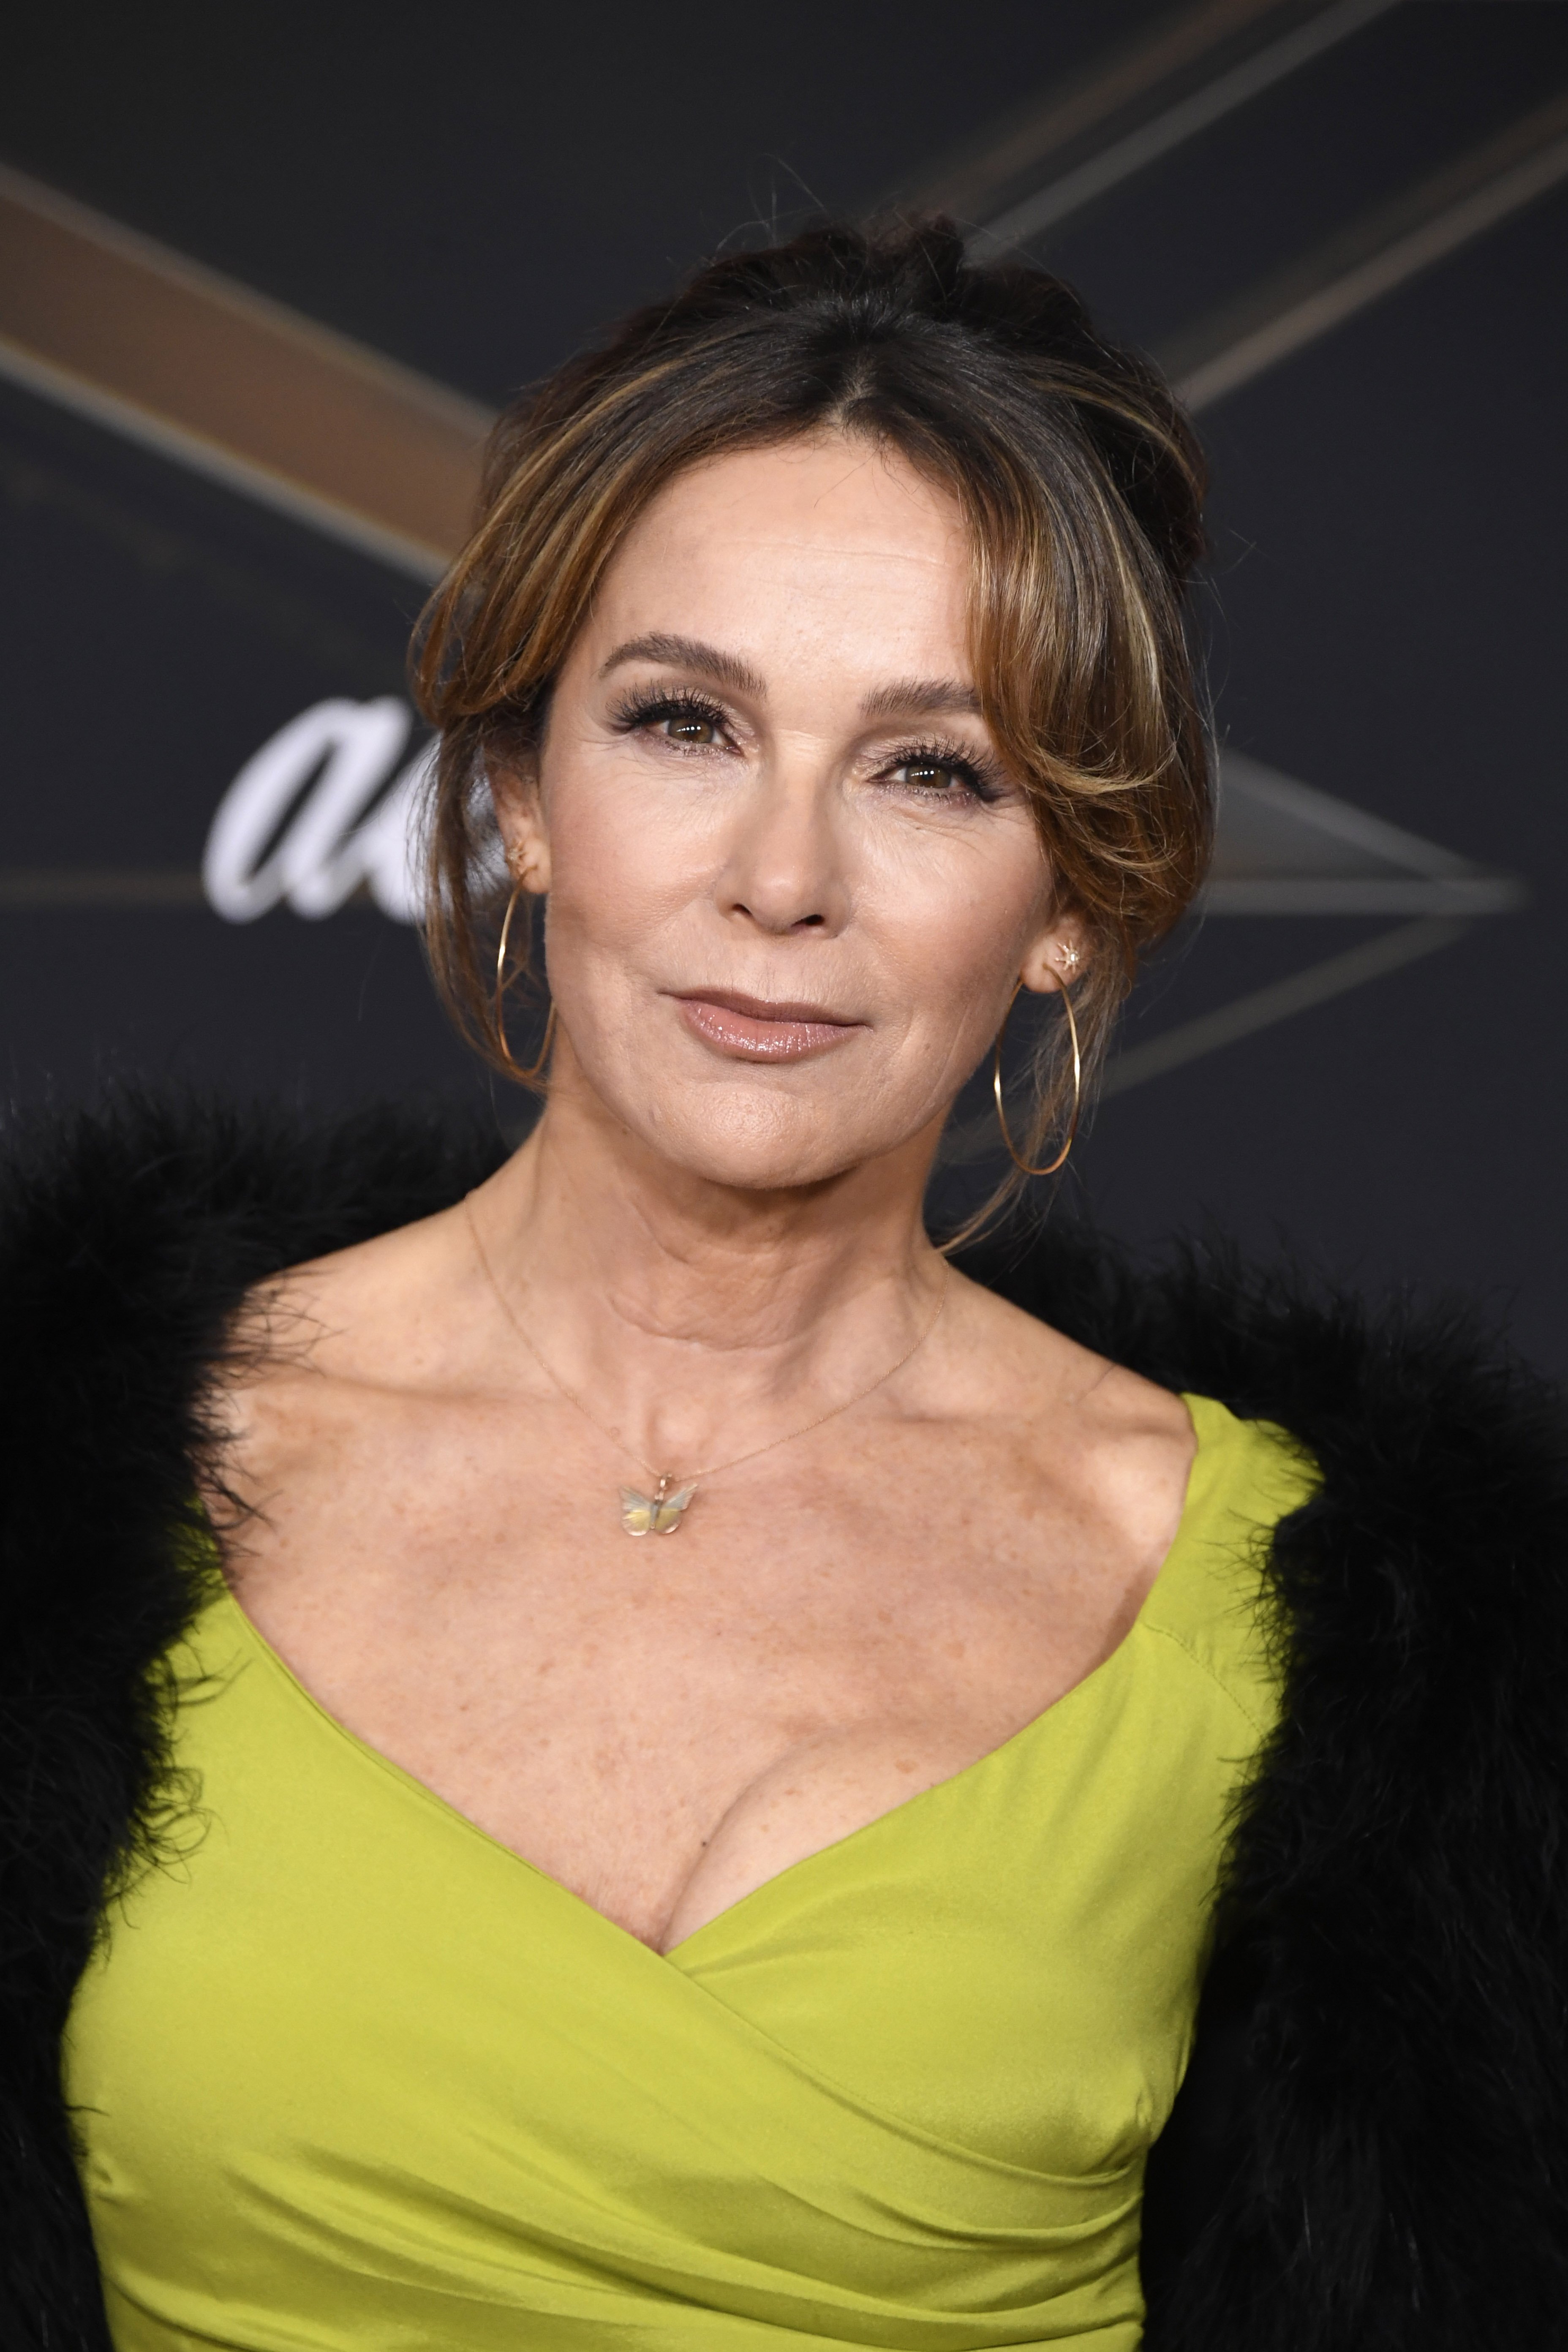 Jennifer Grey attends Marvel Studios' "Captain Marvel" Premiere on March 04, 2019, in Hollywood, California. | Source: Getty Images